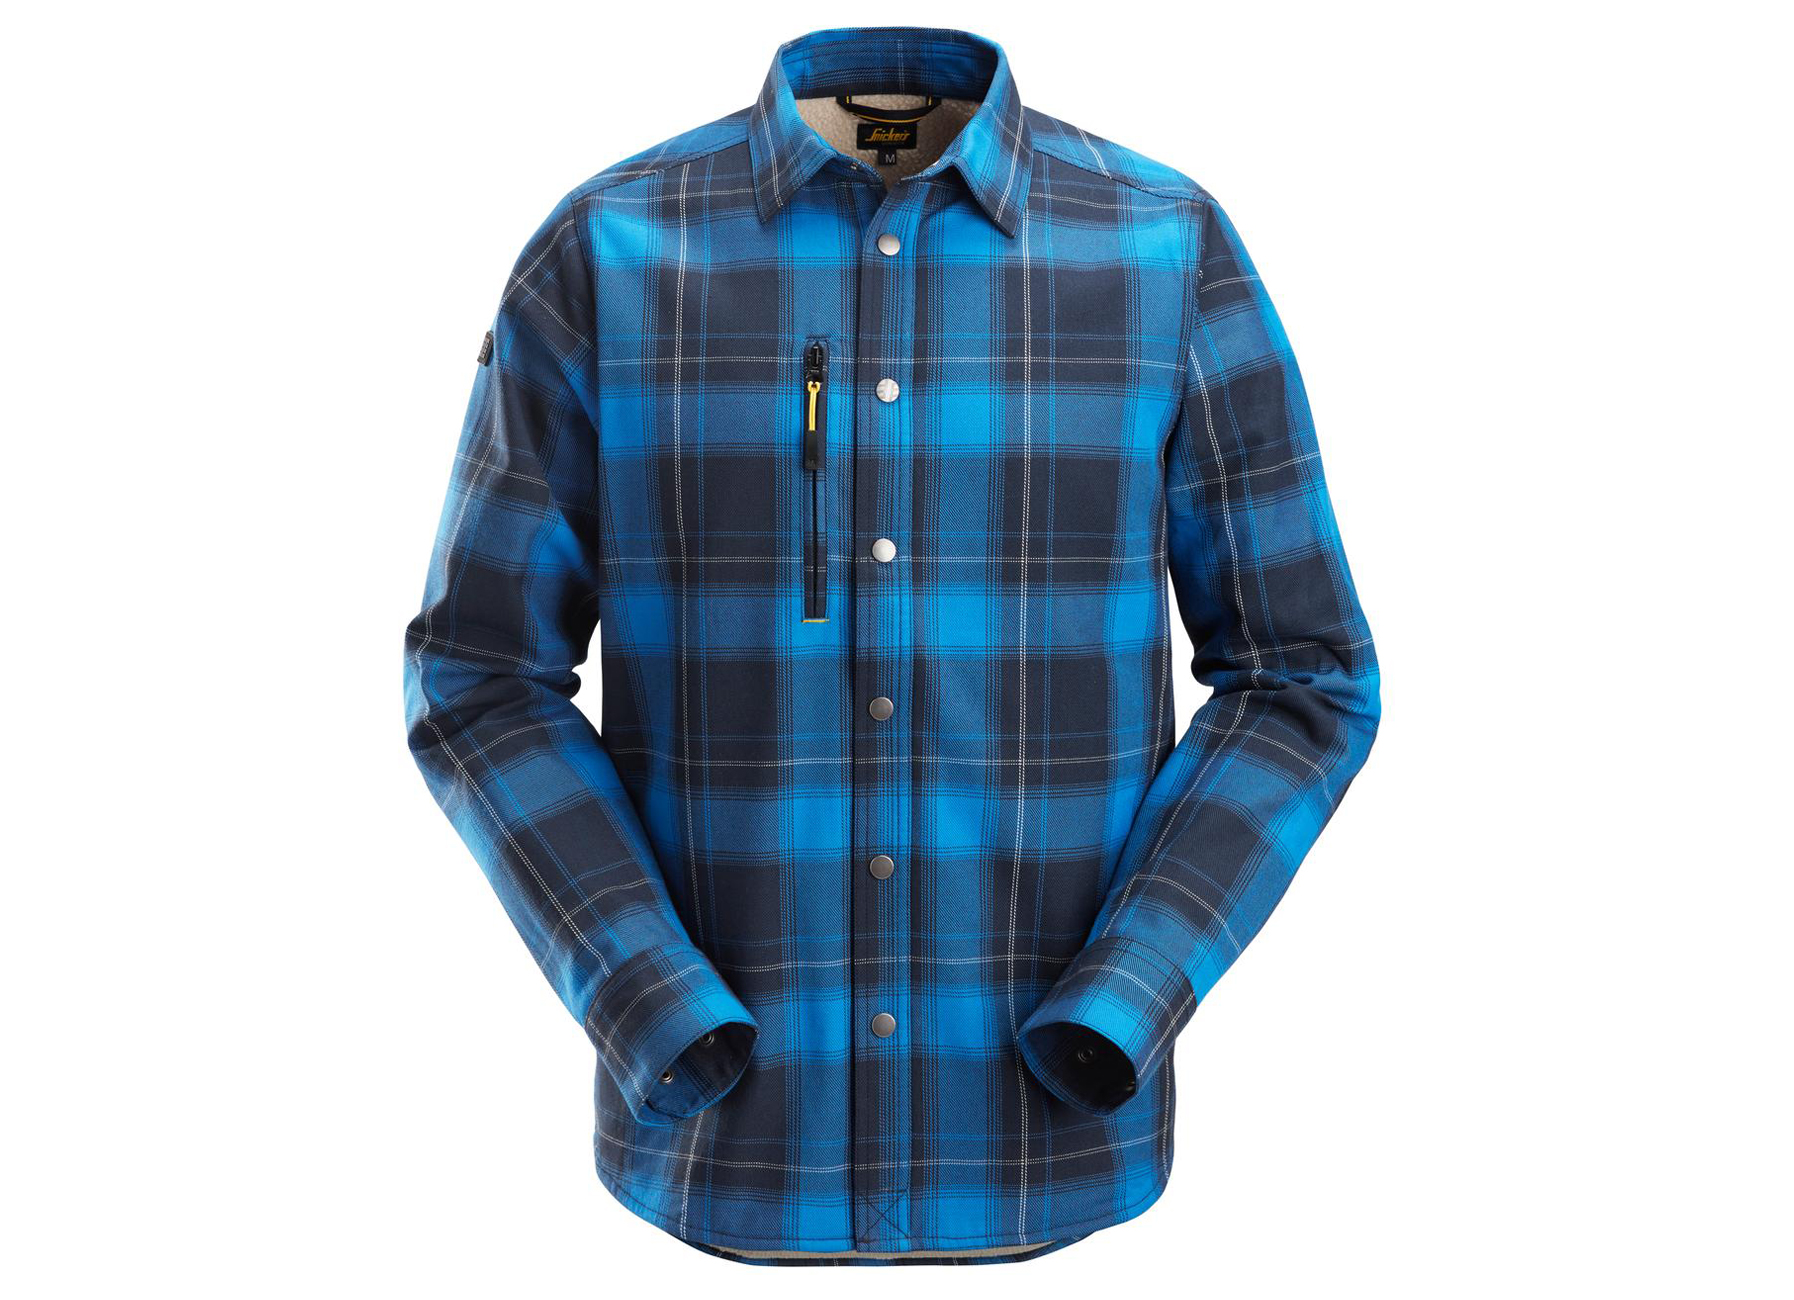 SNICKERS ALLROUNDWORK INSULATED SHIRT BLAUW MAAT:L